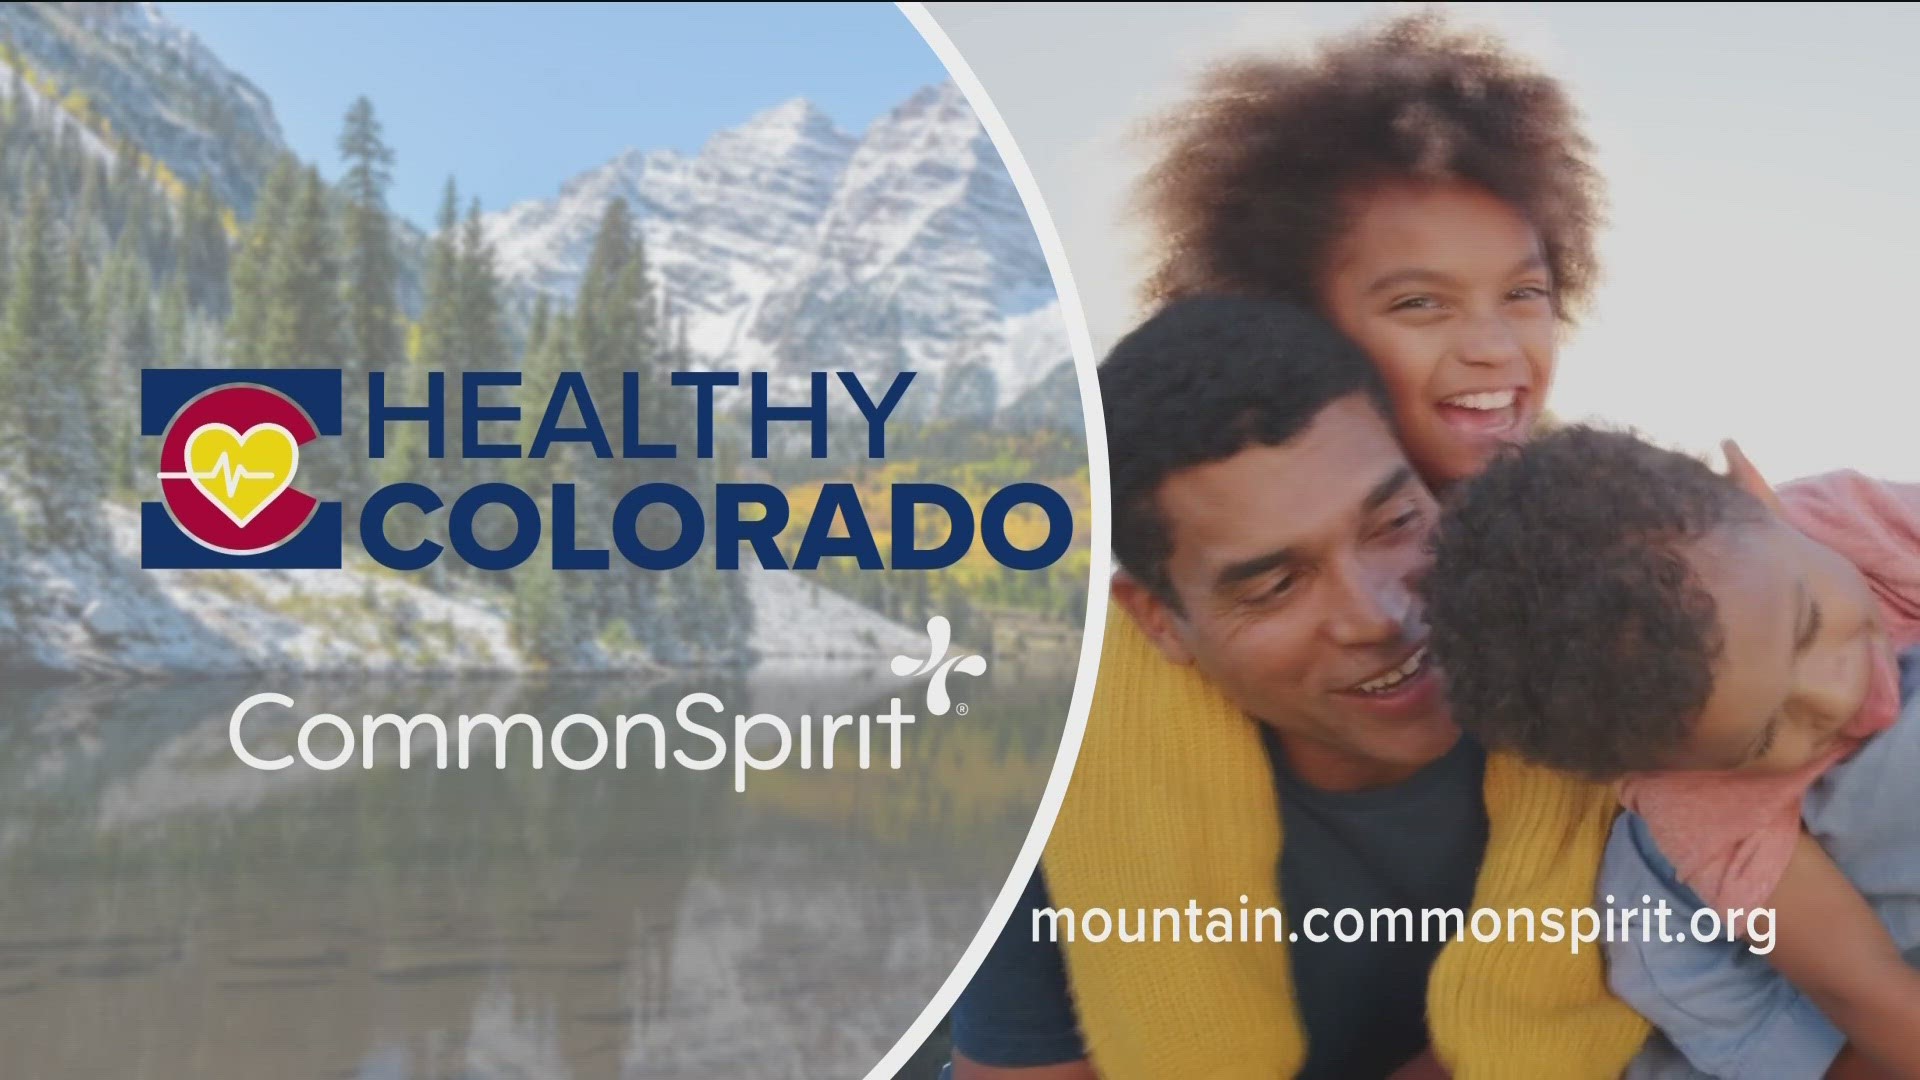 Human Kindness is what CommonSpirit Health is all about. Visit Mountain.CommonSpirit.org to learn more. **PAID CONTENT**